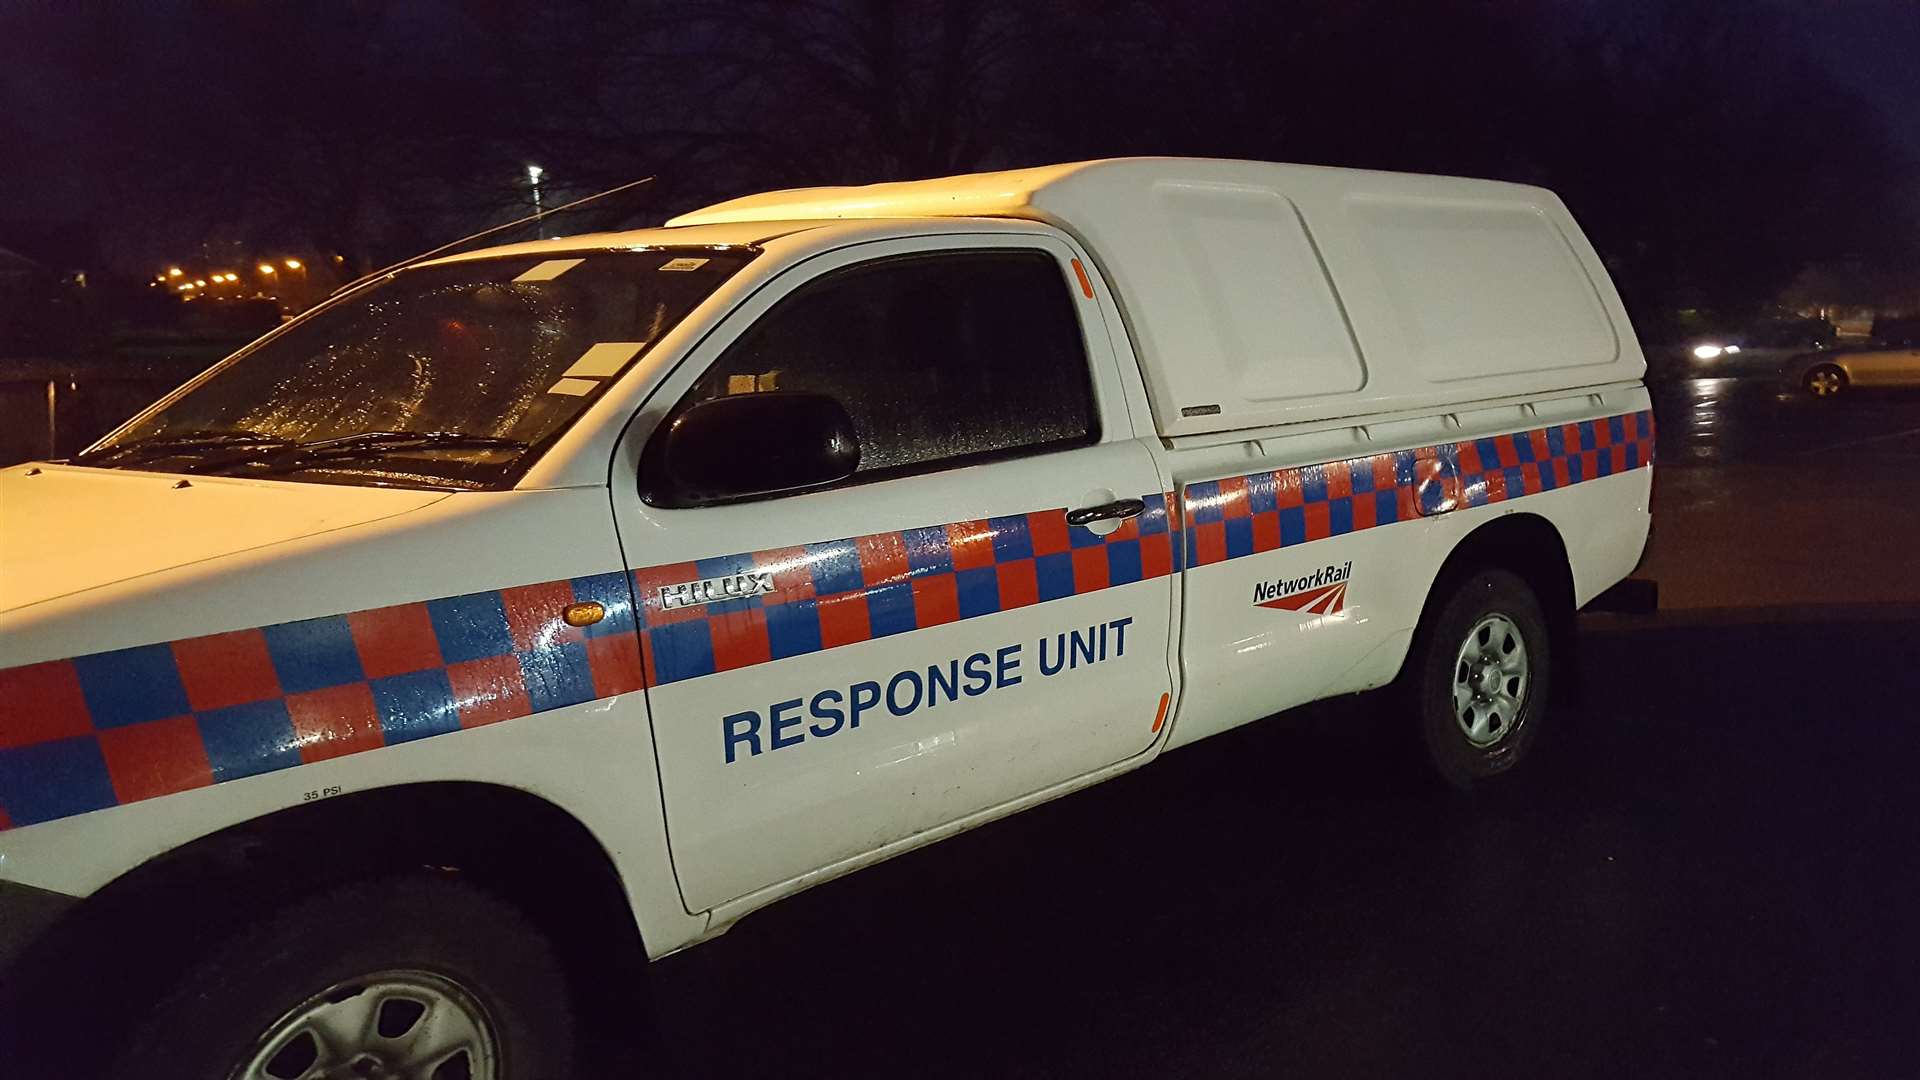 An incident response unit attended the scene